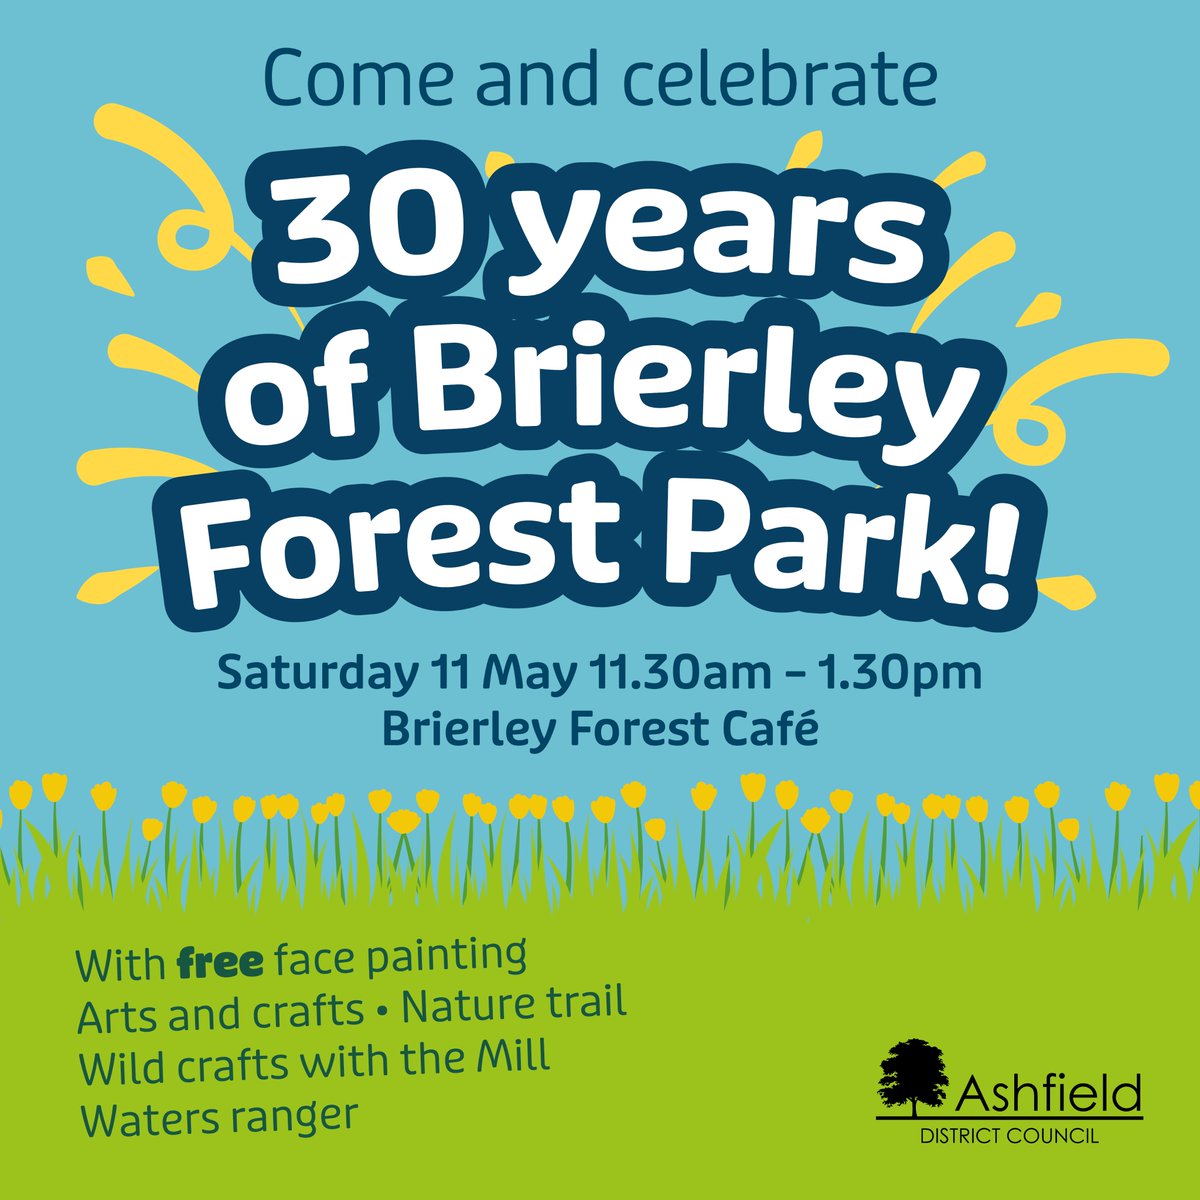 There's only a week to go until our celebration of Brierley Forest Park turning 30! 🎂 📅 Join us on Saturday 11 May from 11.30am - 1.30pm at the Brierley Cafe for free face painting, arts and crafts, and a nature trail